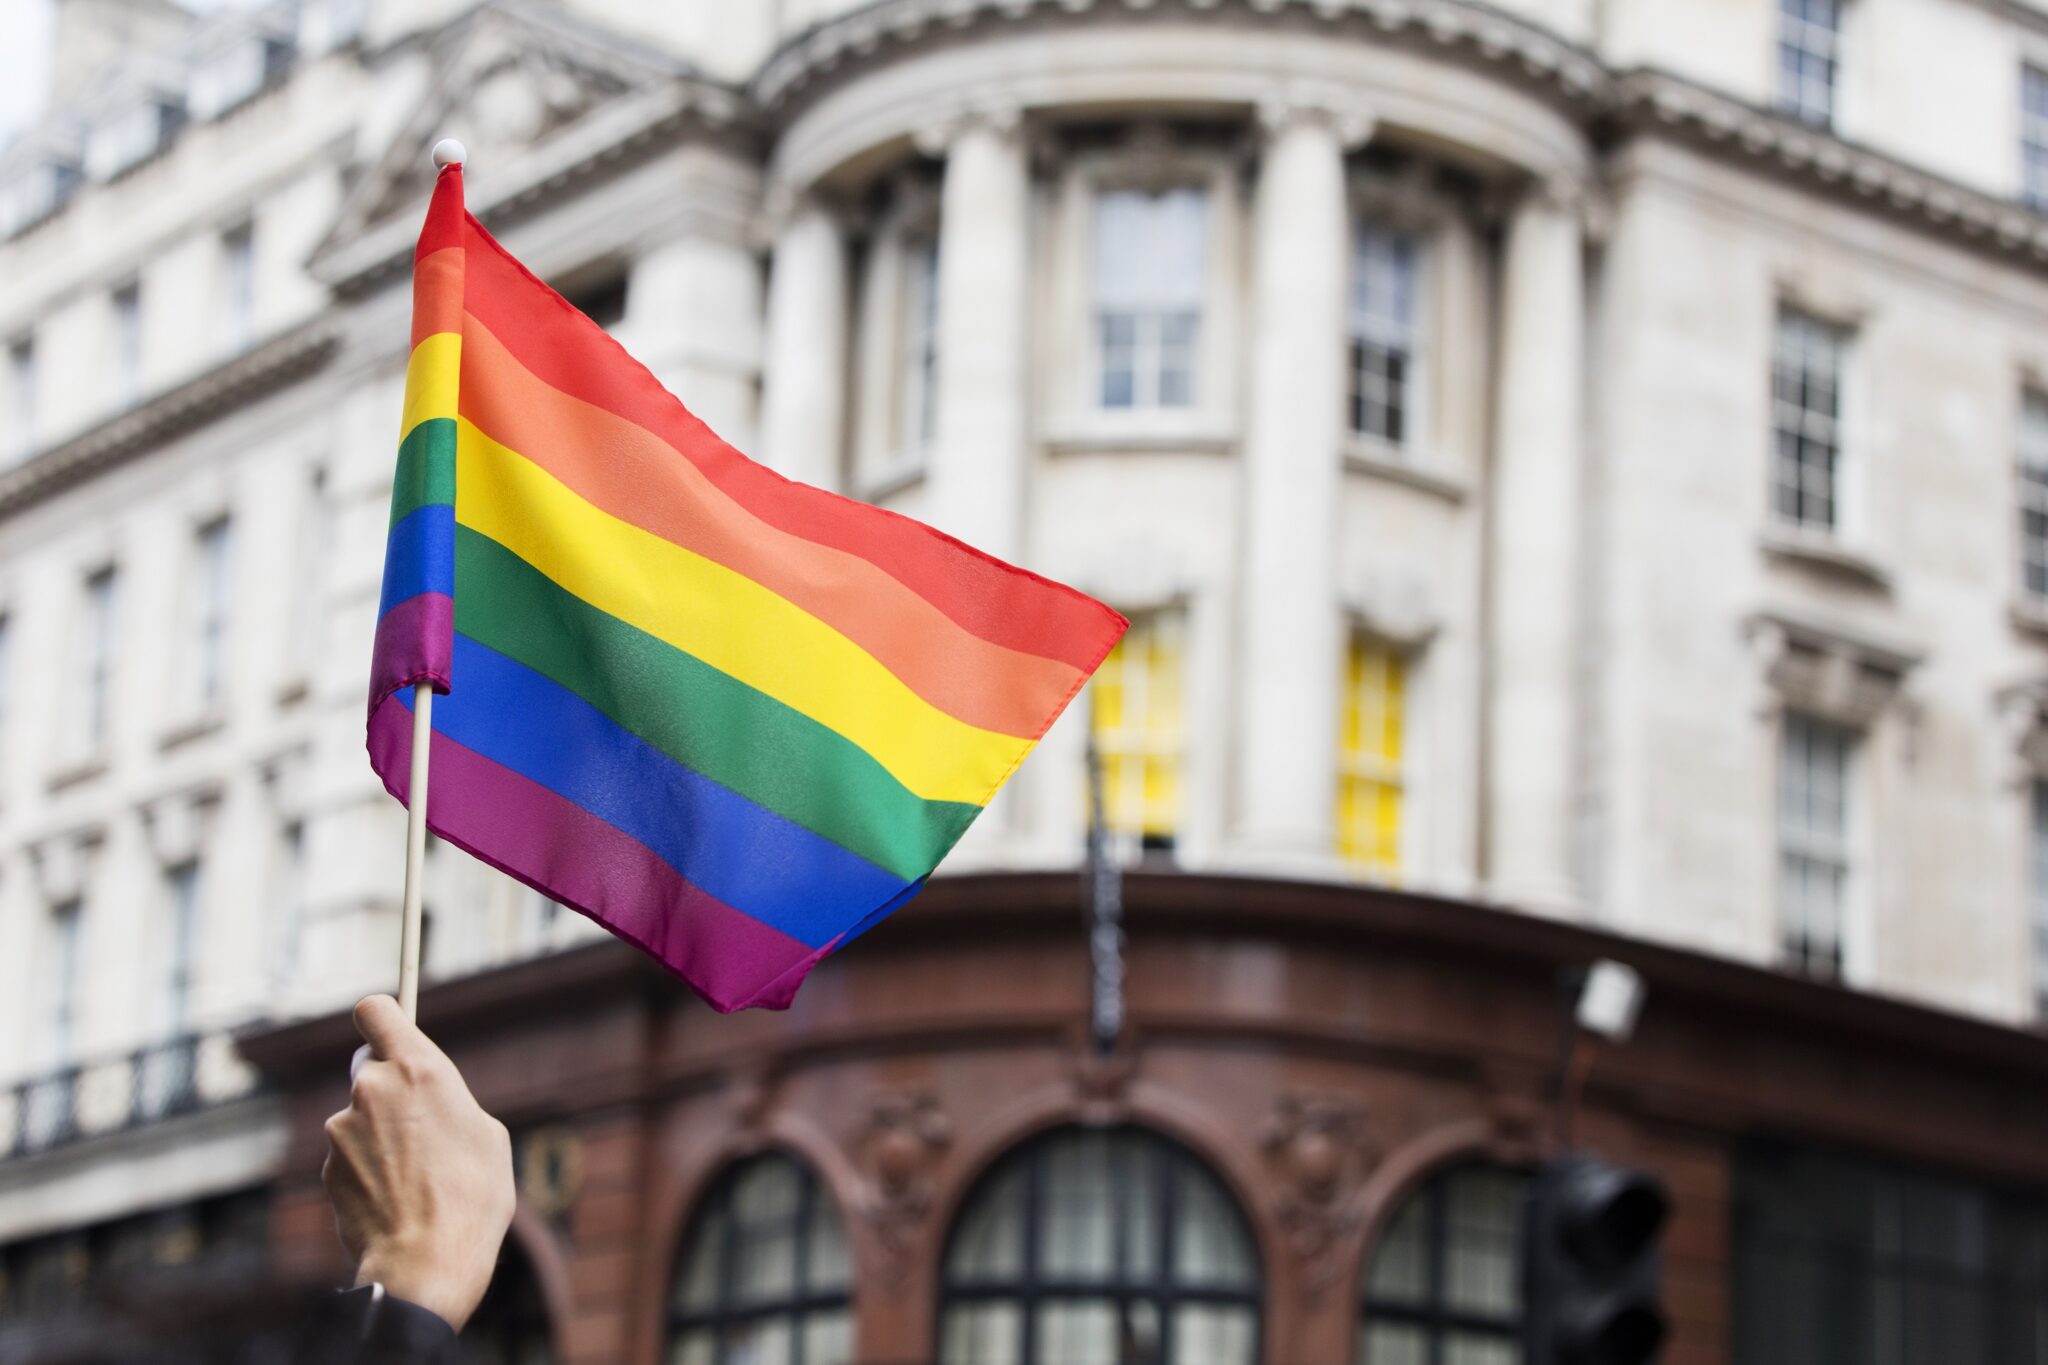 London's first museum dedicated to British LGBTQ+ history to open soon